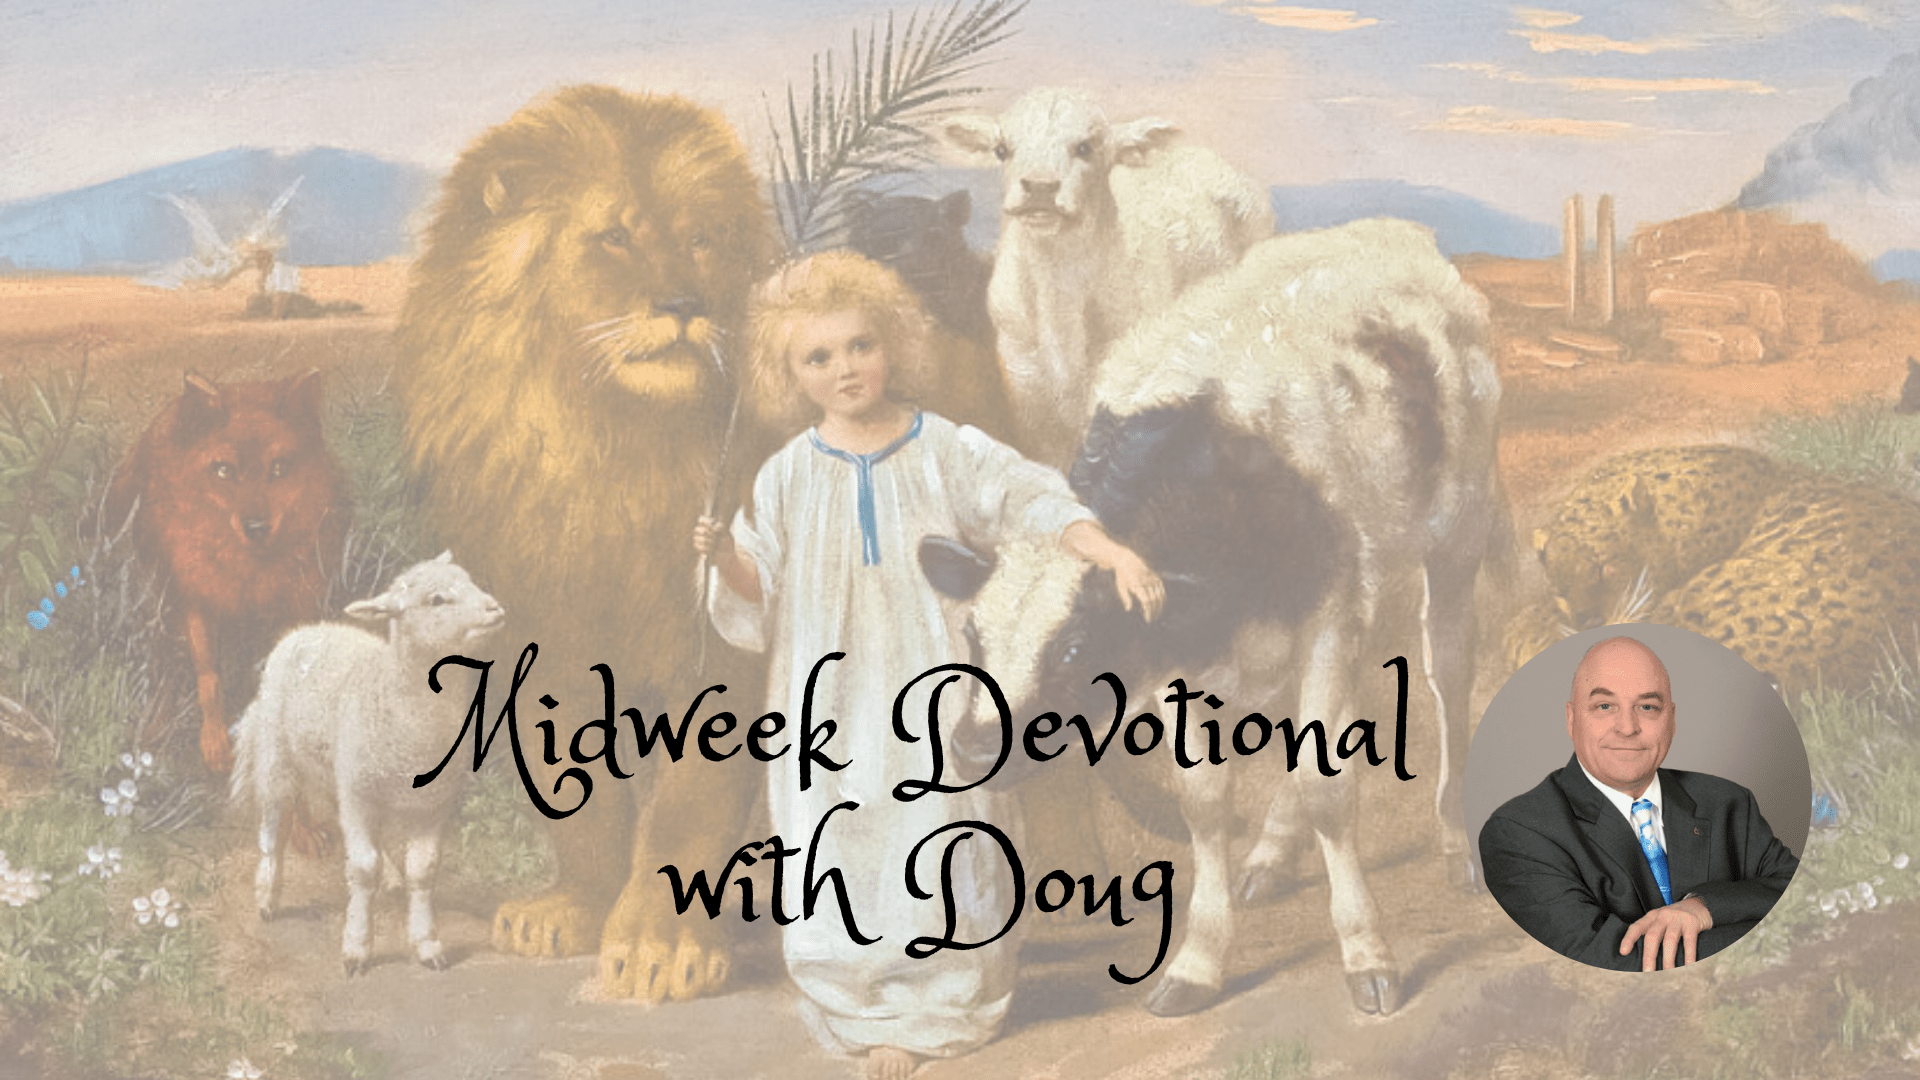 Midweek Devotional with Doug for fourth week of June